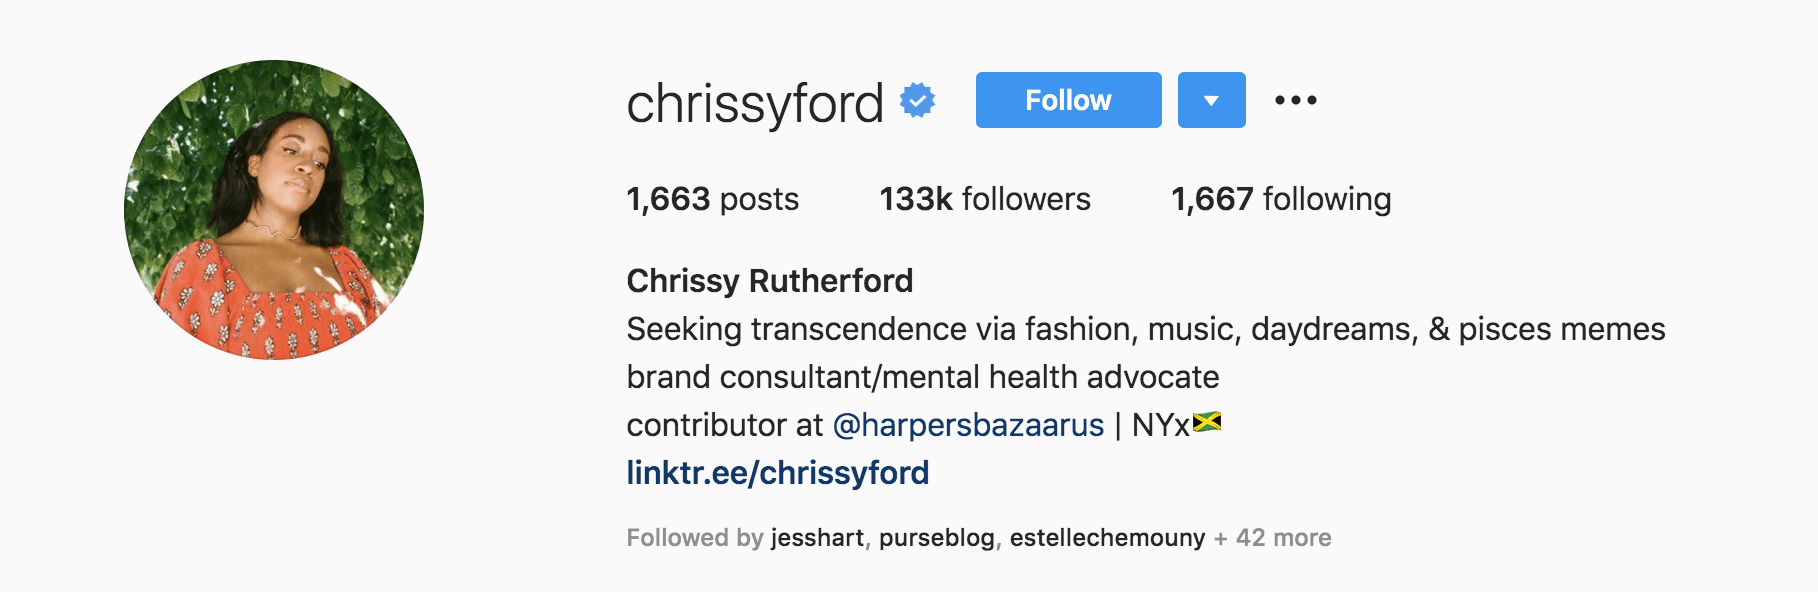 Top Fashion Influencers - Chrissy Rutherford